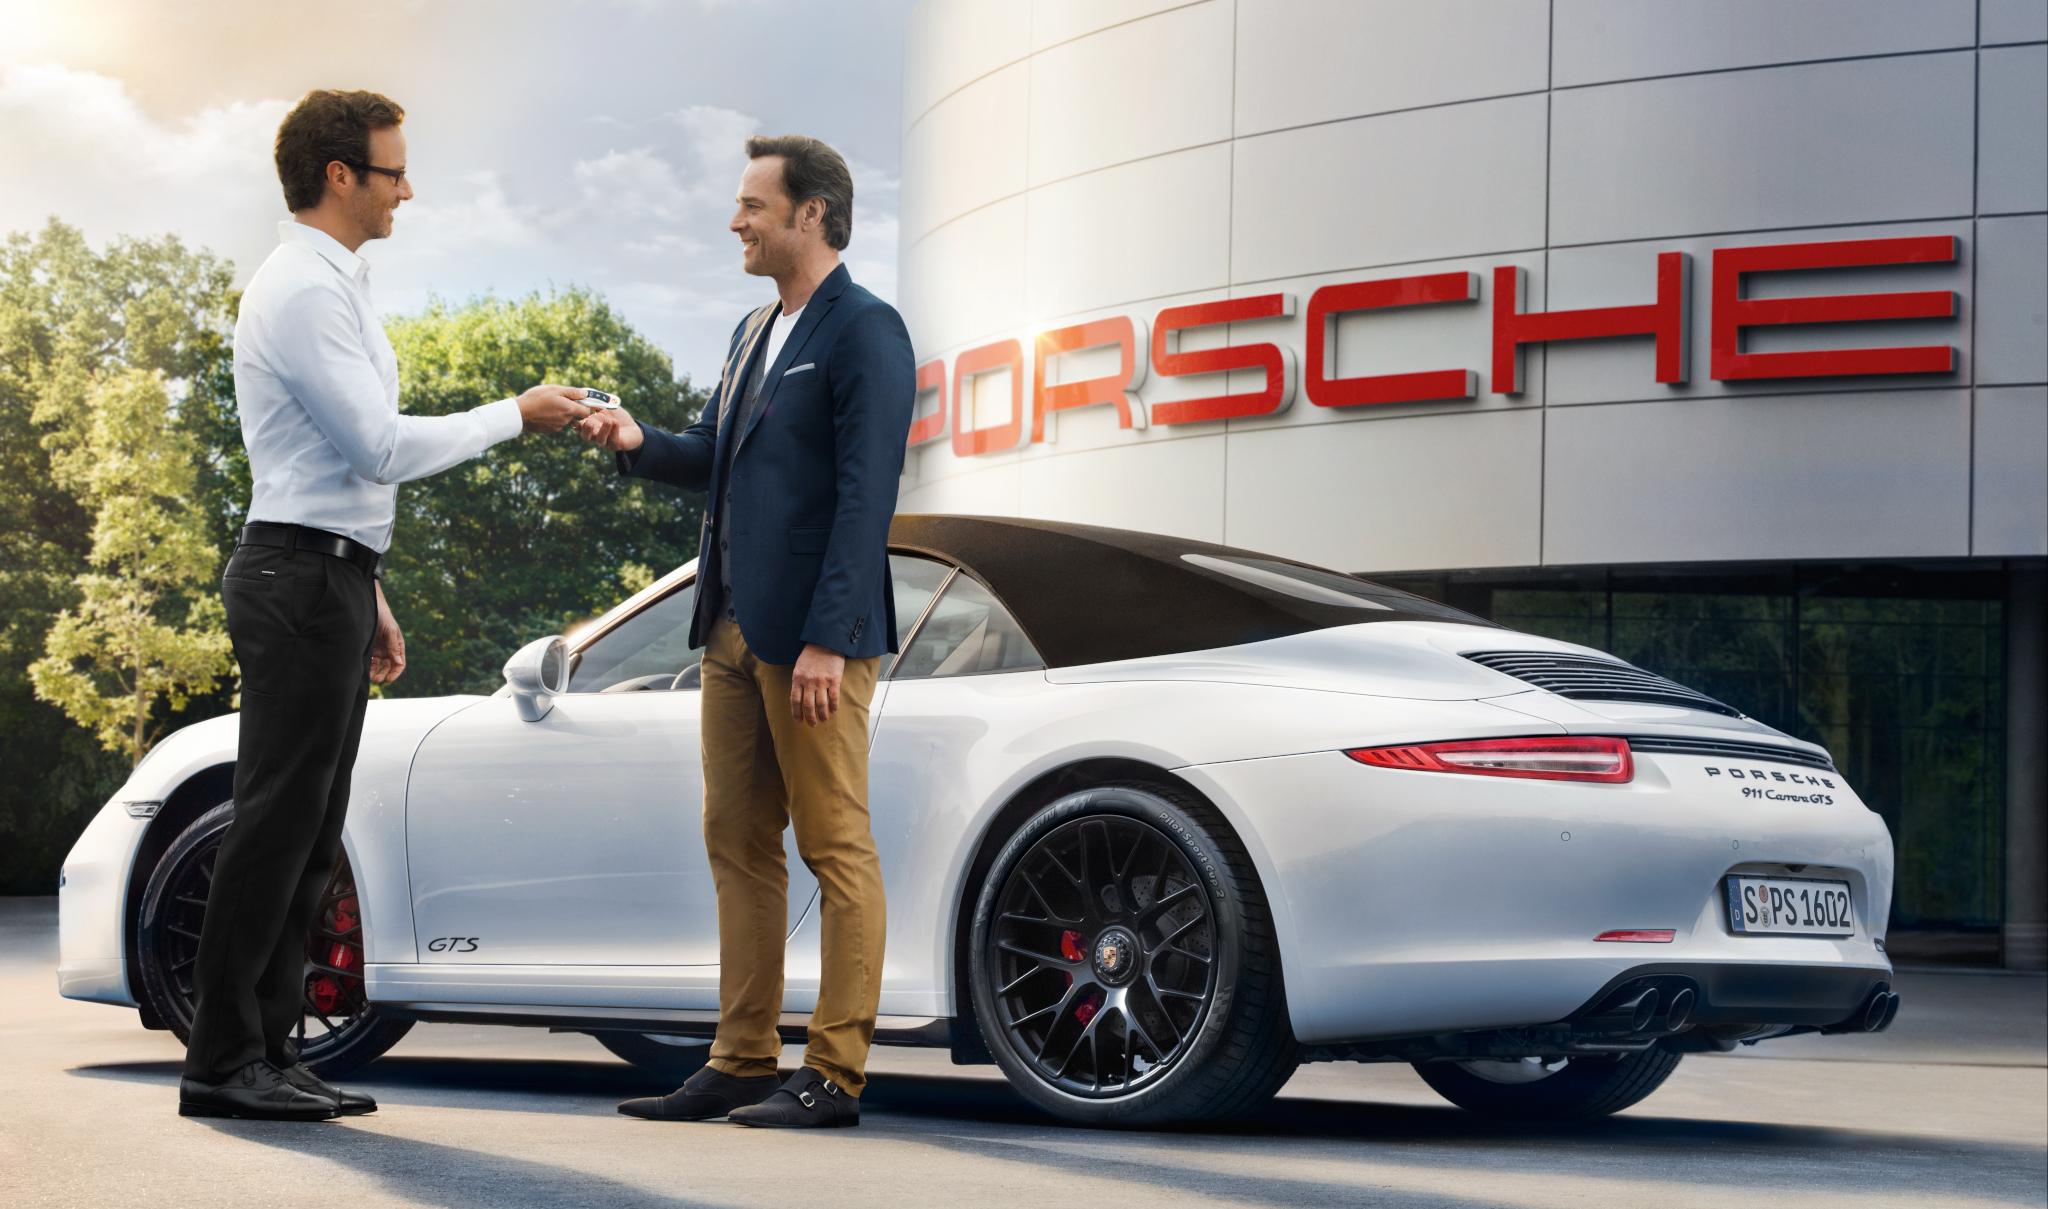 Porsche Approved Certified Pre-Owned Program